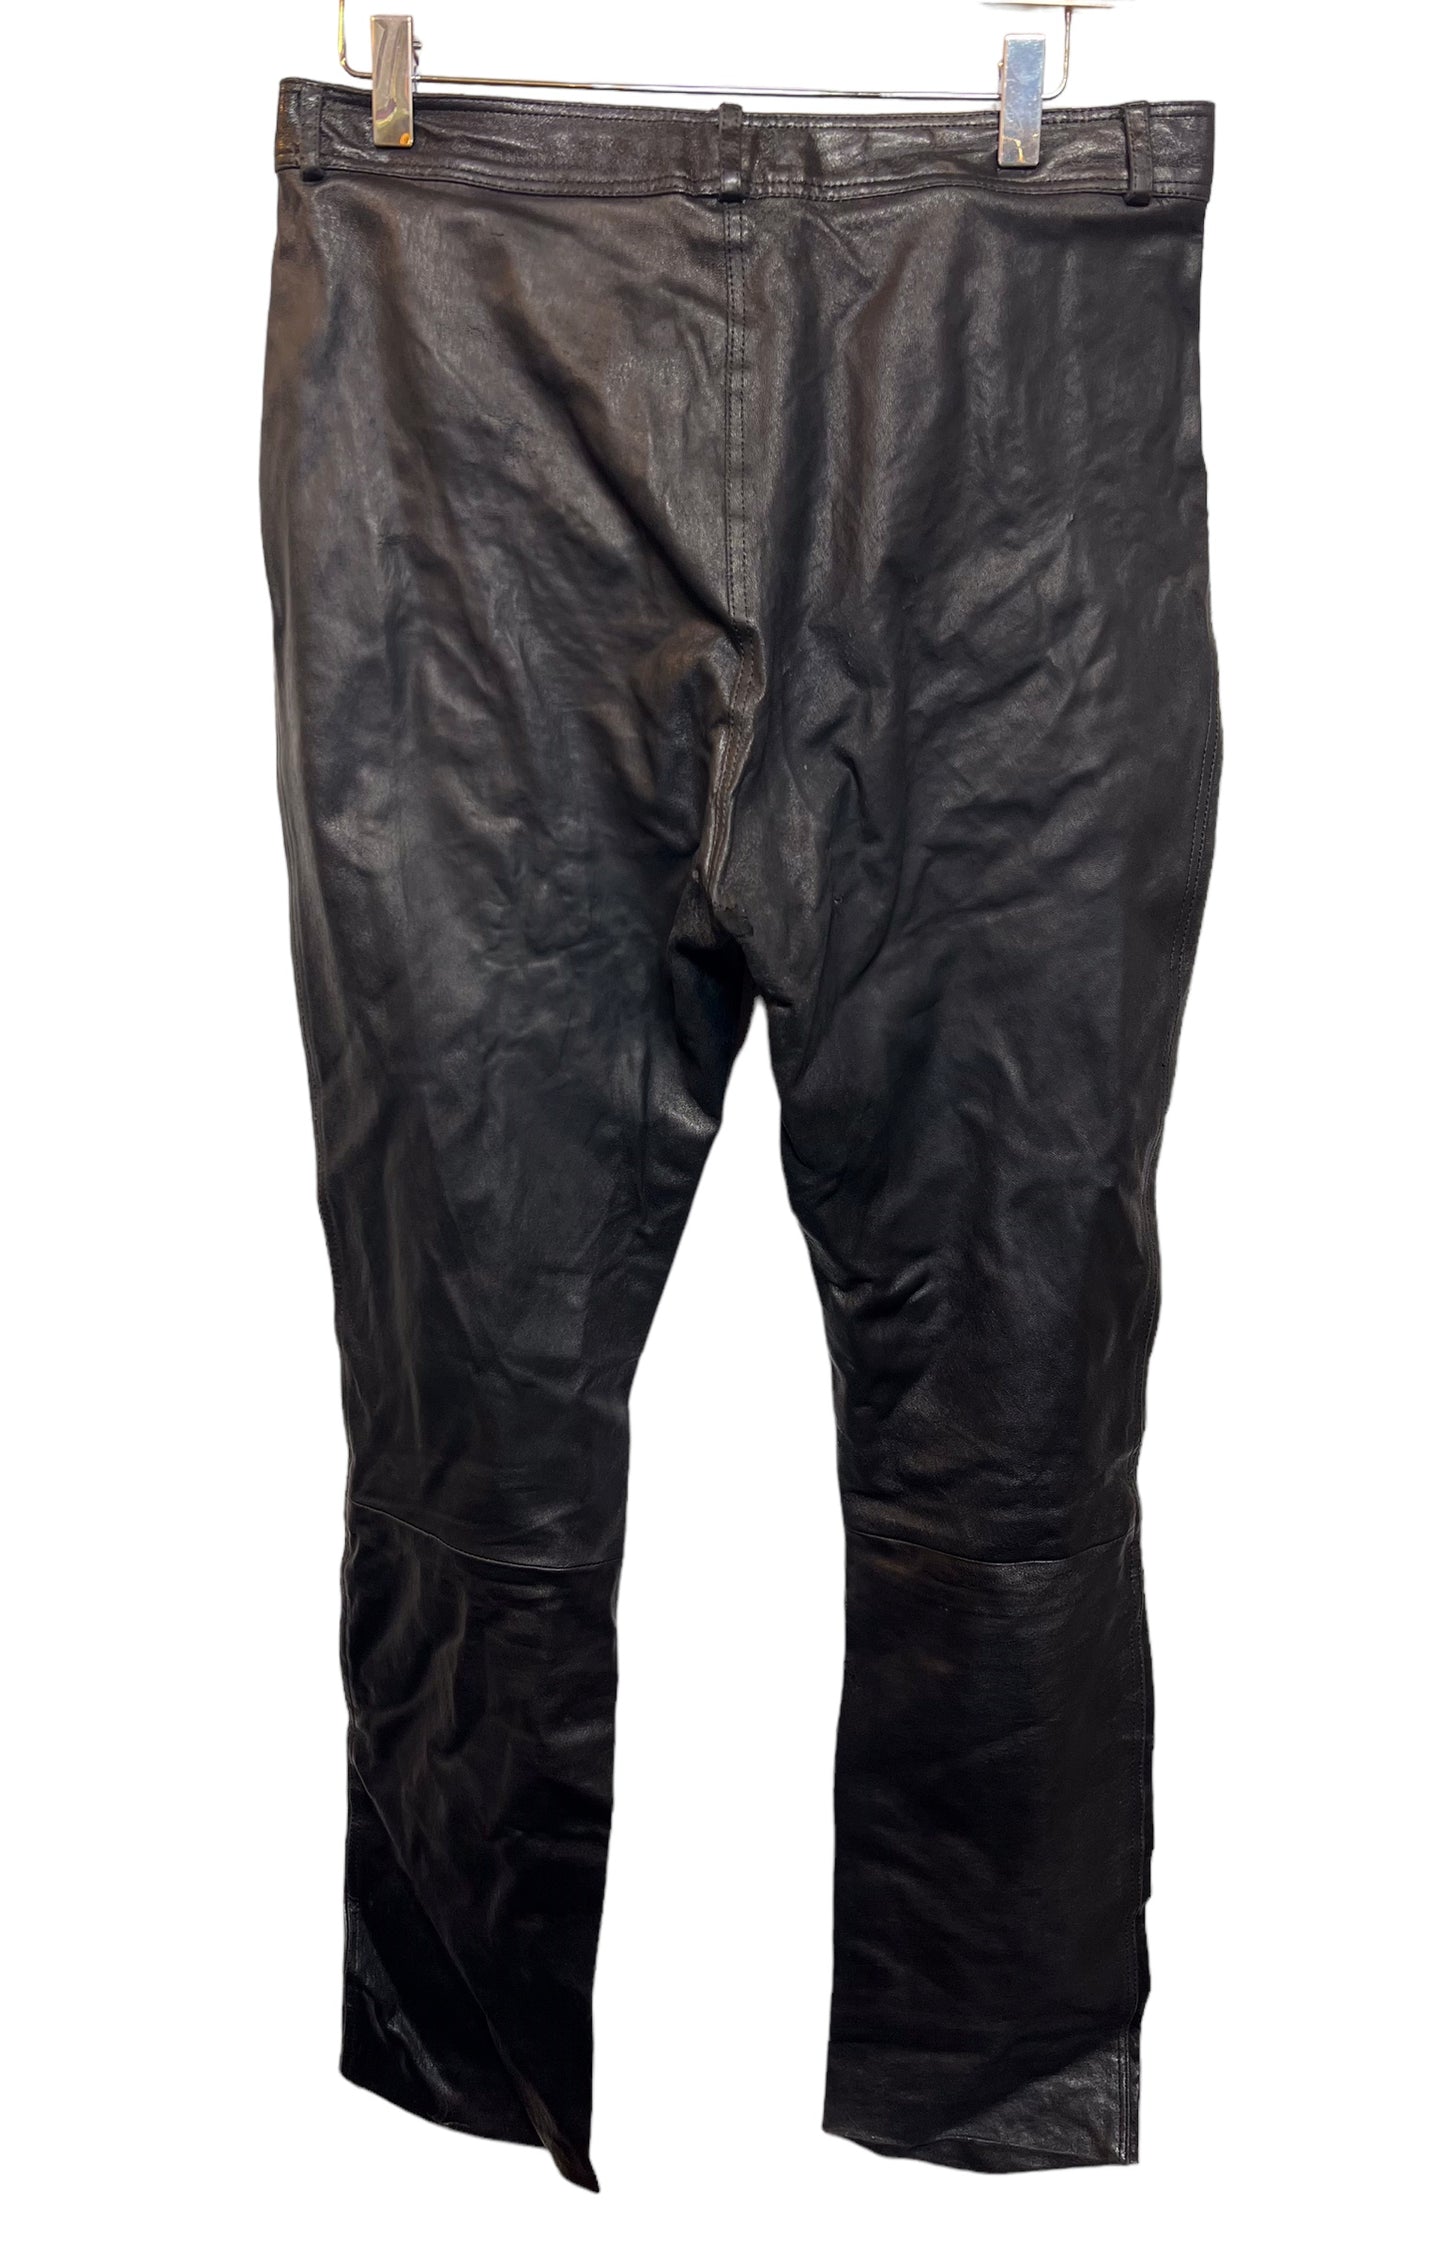 Faux Leather Black Trousers (Size W32)